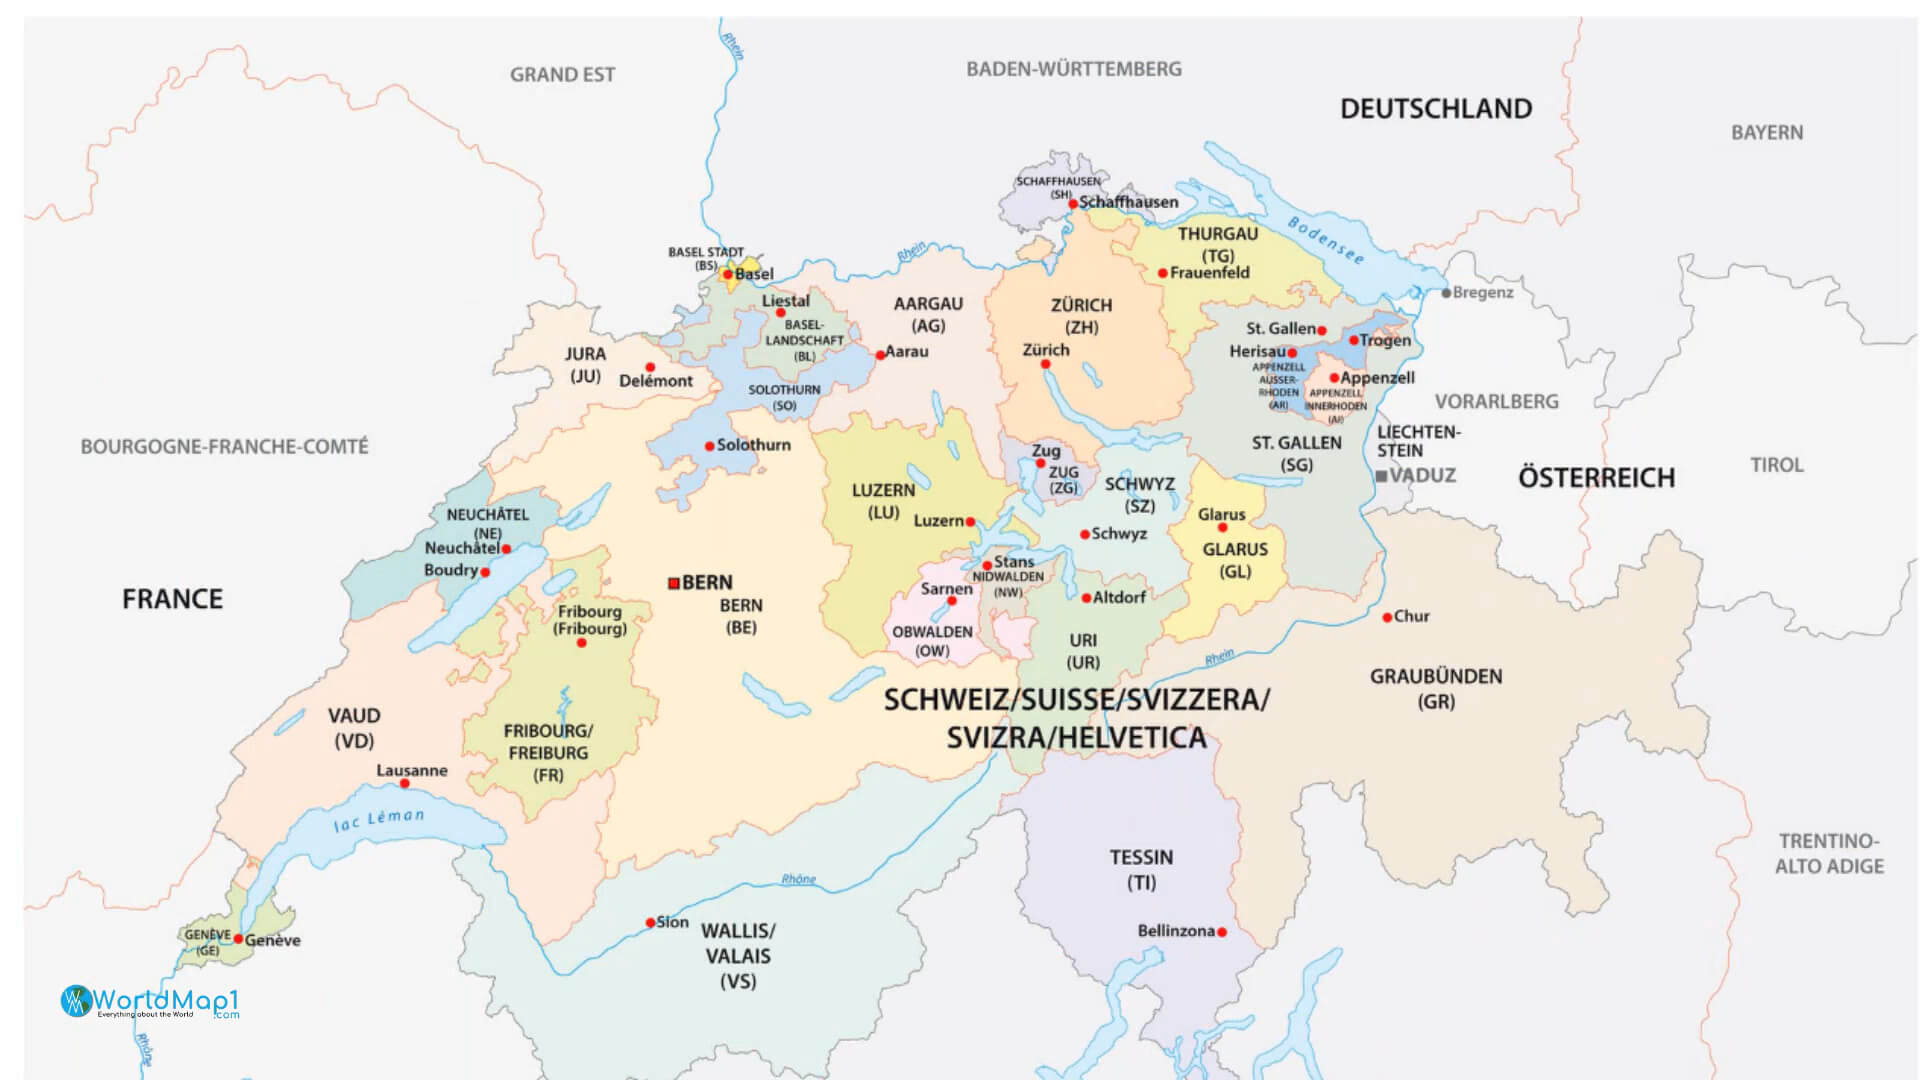 Switzerland Country and Cantons Border Map